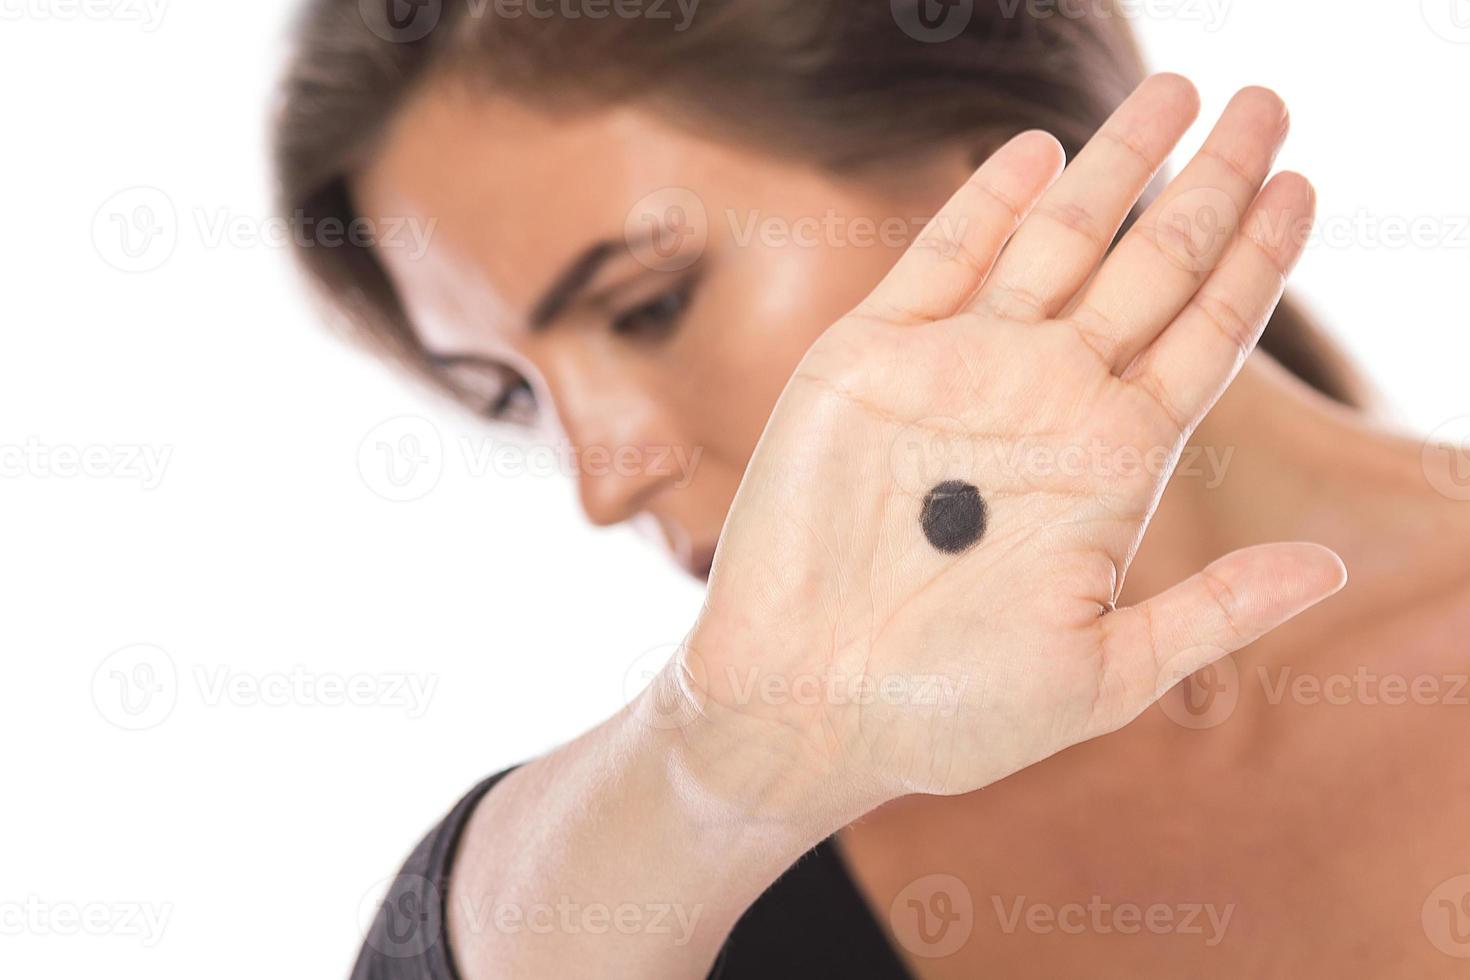 The Black Dot Campaign. Sign of domestic violence photo